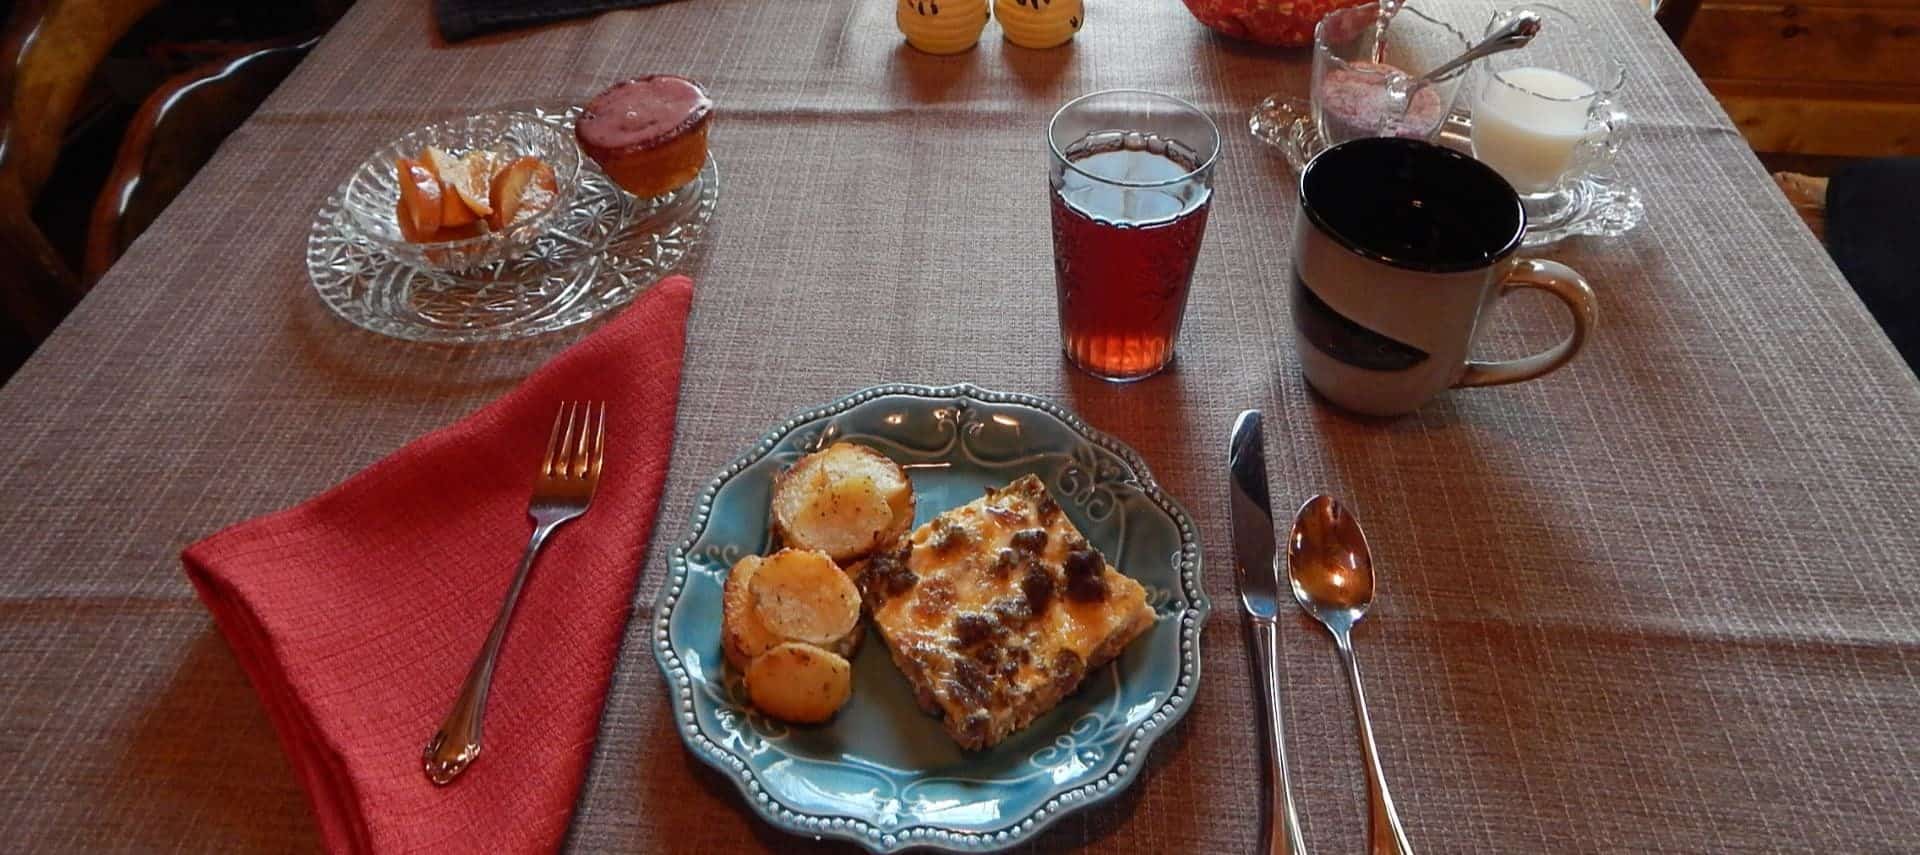 Egg and sausage casserole with fried potatoes on a blue plate resting on tablecloth with folded red napkin, juice, and coffee